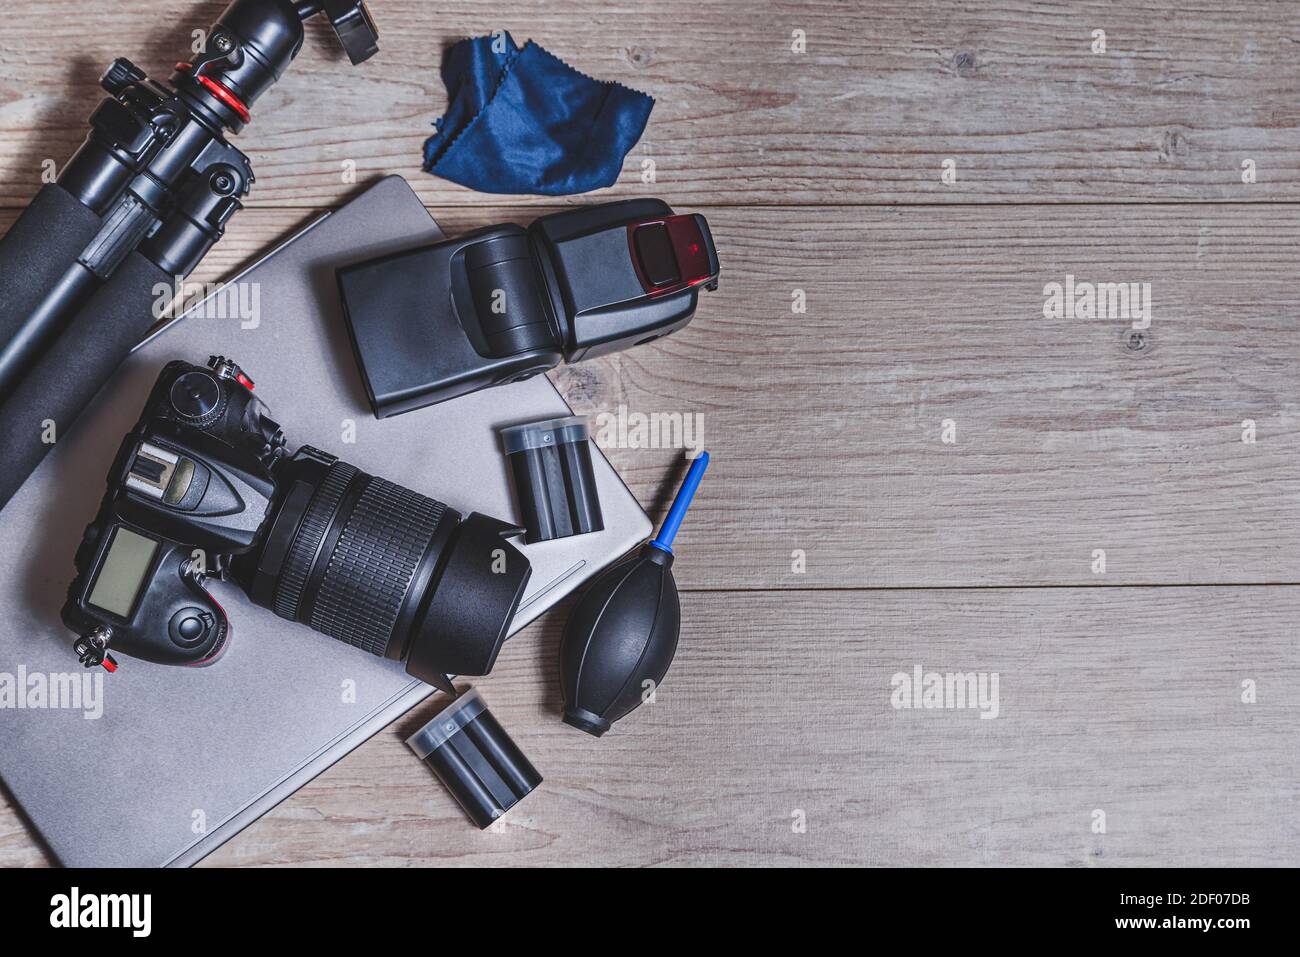 top view of a wooden table with photography equipment like digital professional camera, external flash unit, tripod, cleaning accessories and batterie Stock Photo